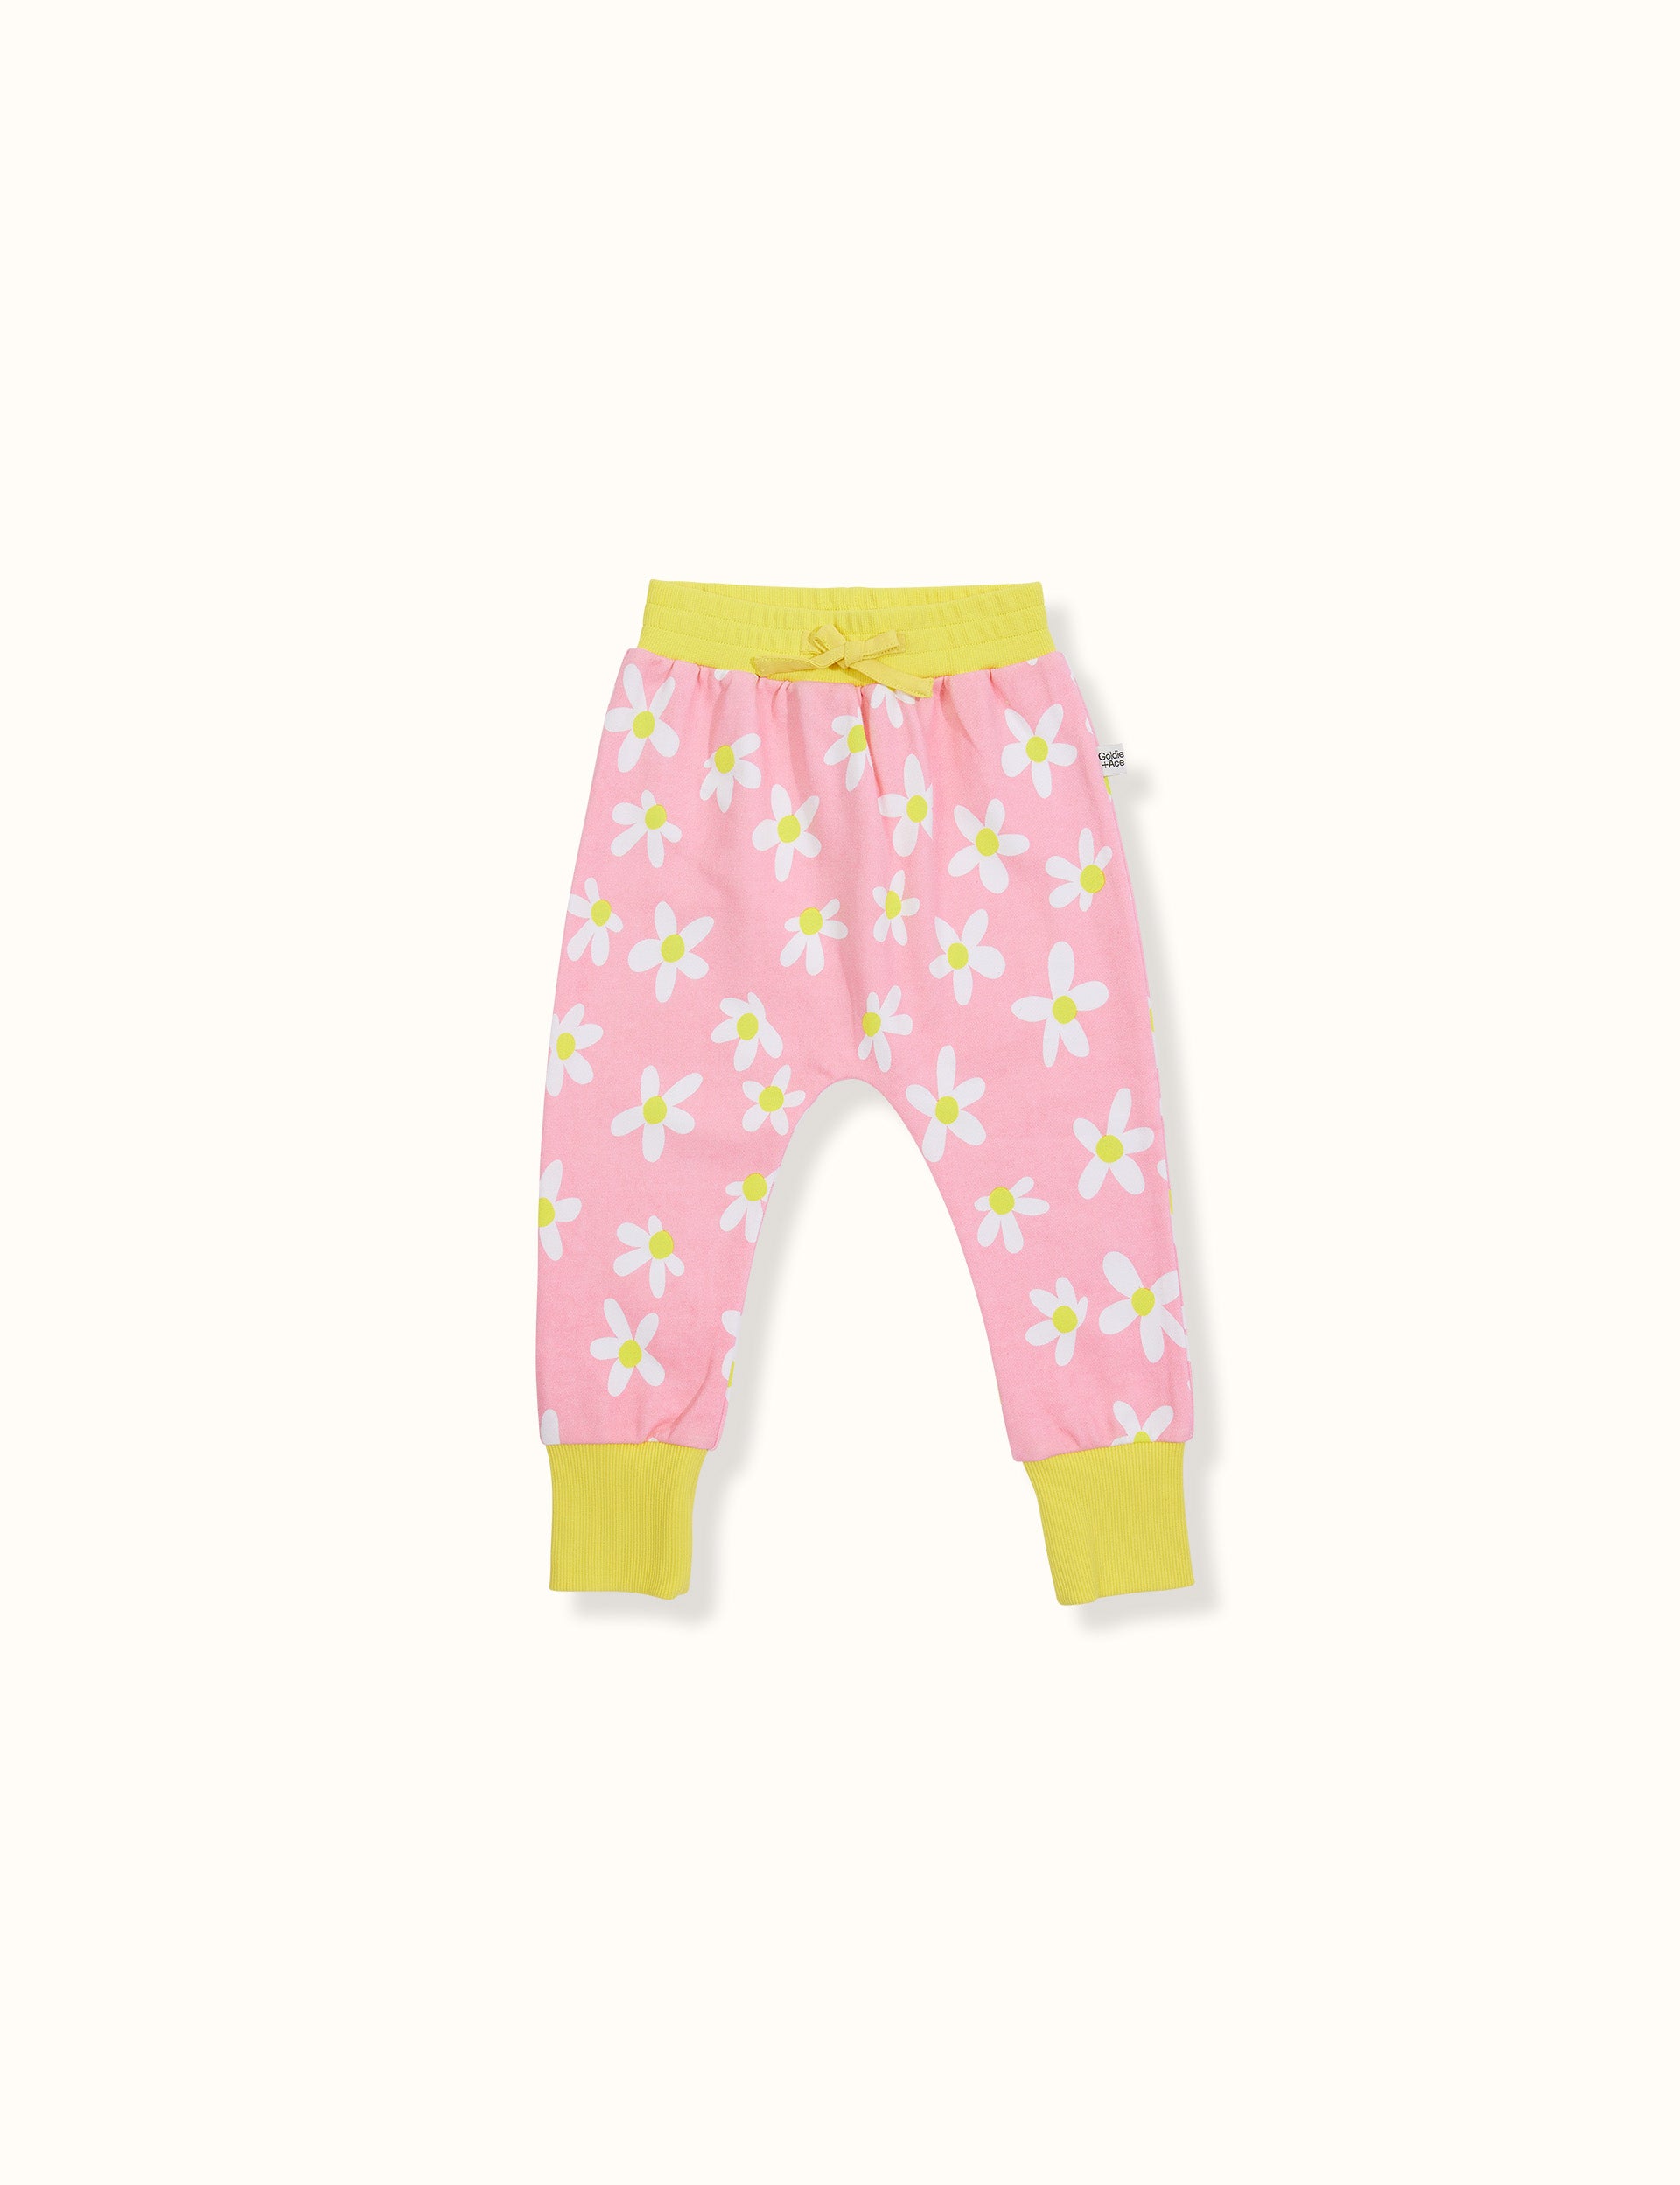 Goldie + Ace - Dahlia Daisy Terry Sweatpants (Pink)